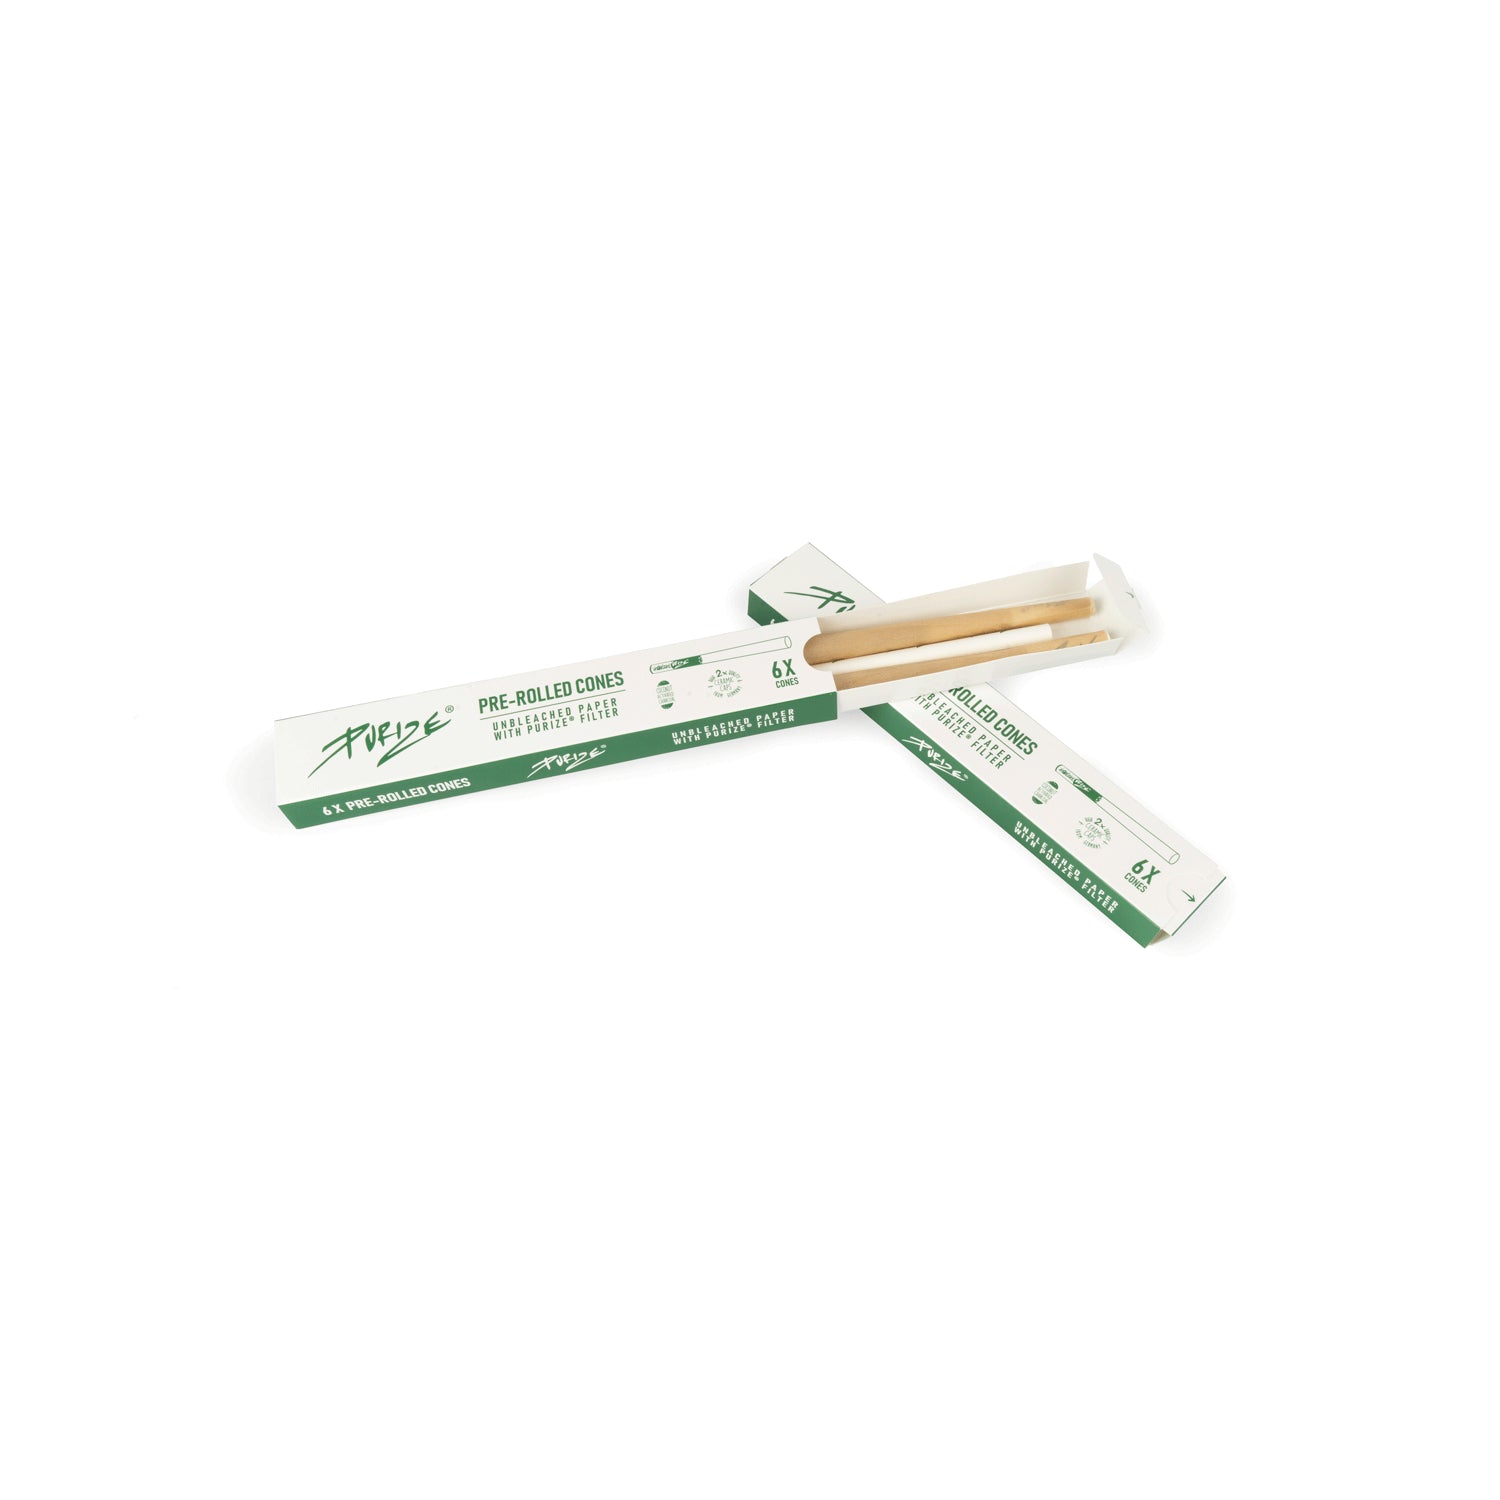 PURIZE Pre-Rolled Cones 6er